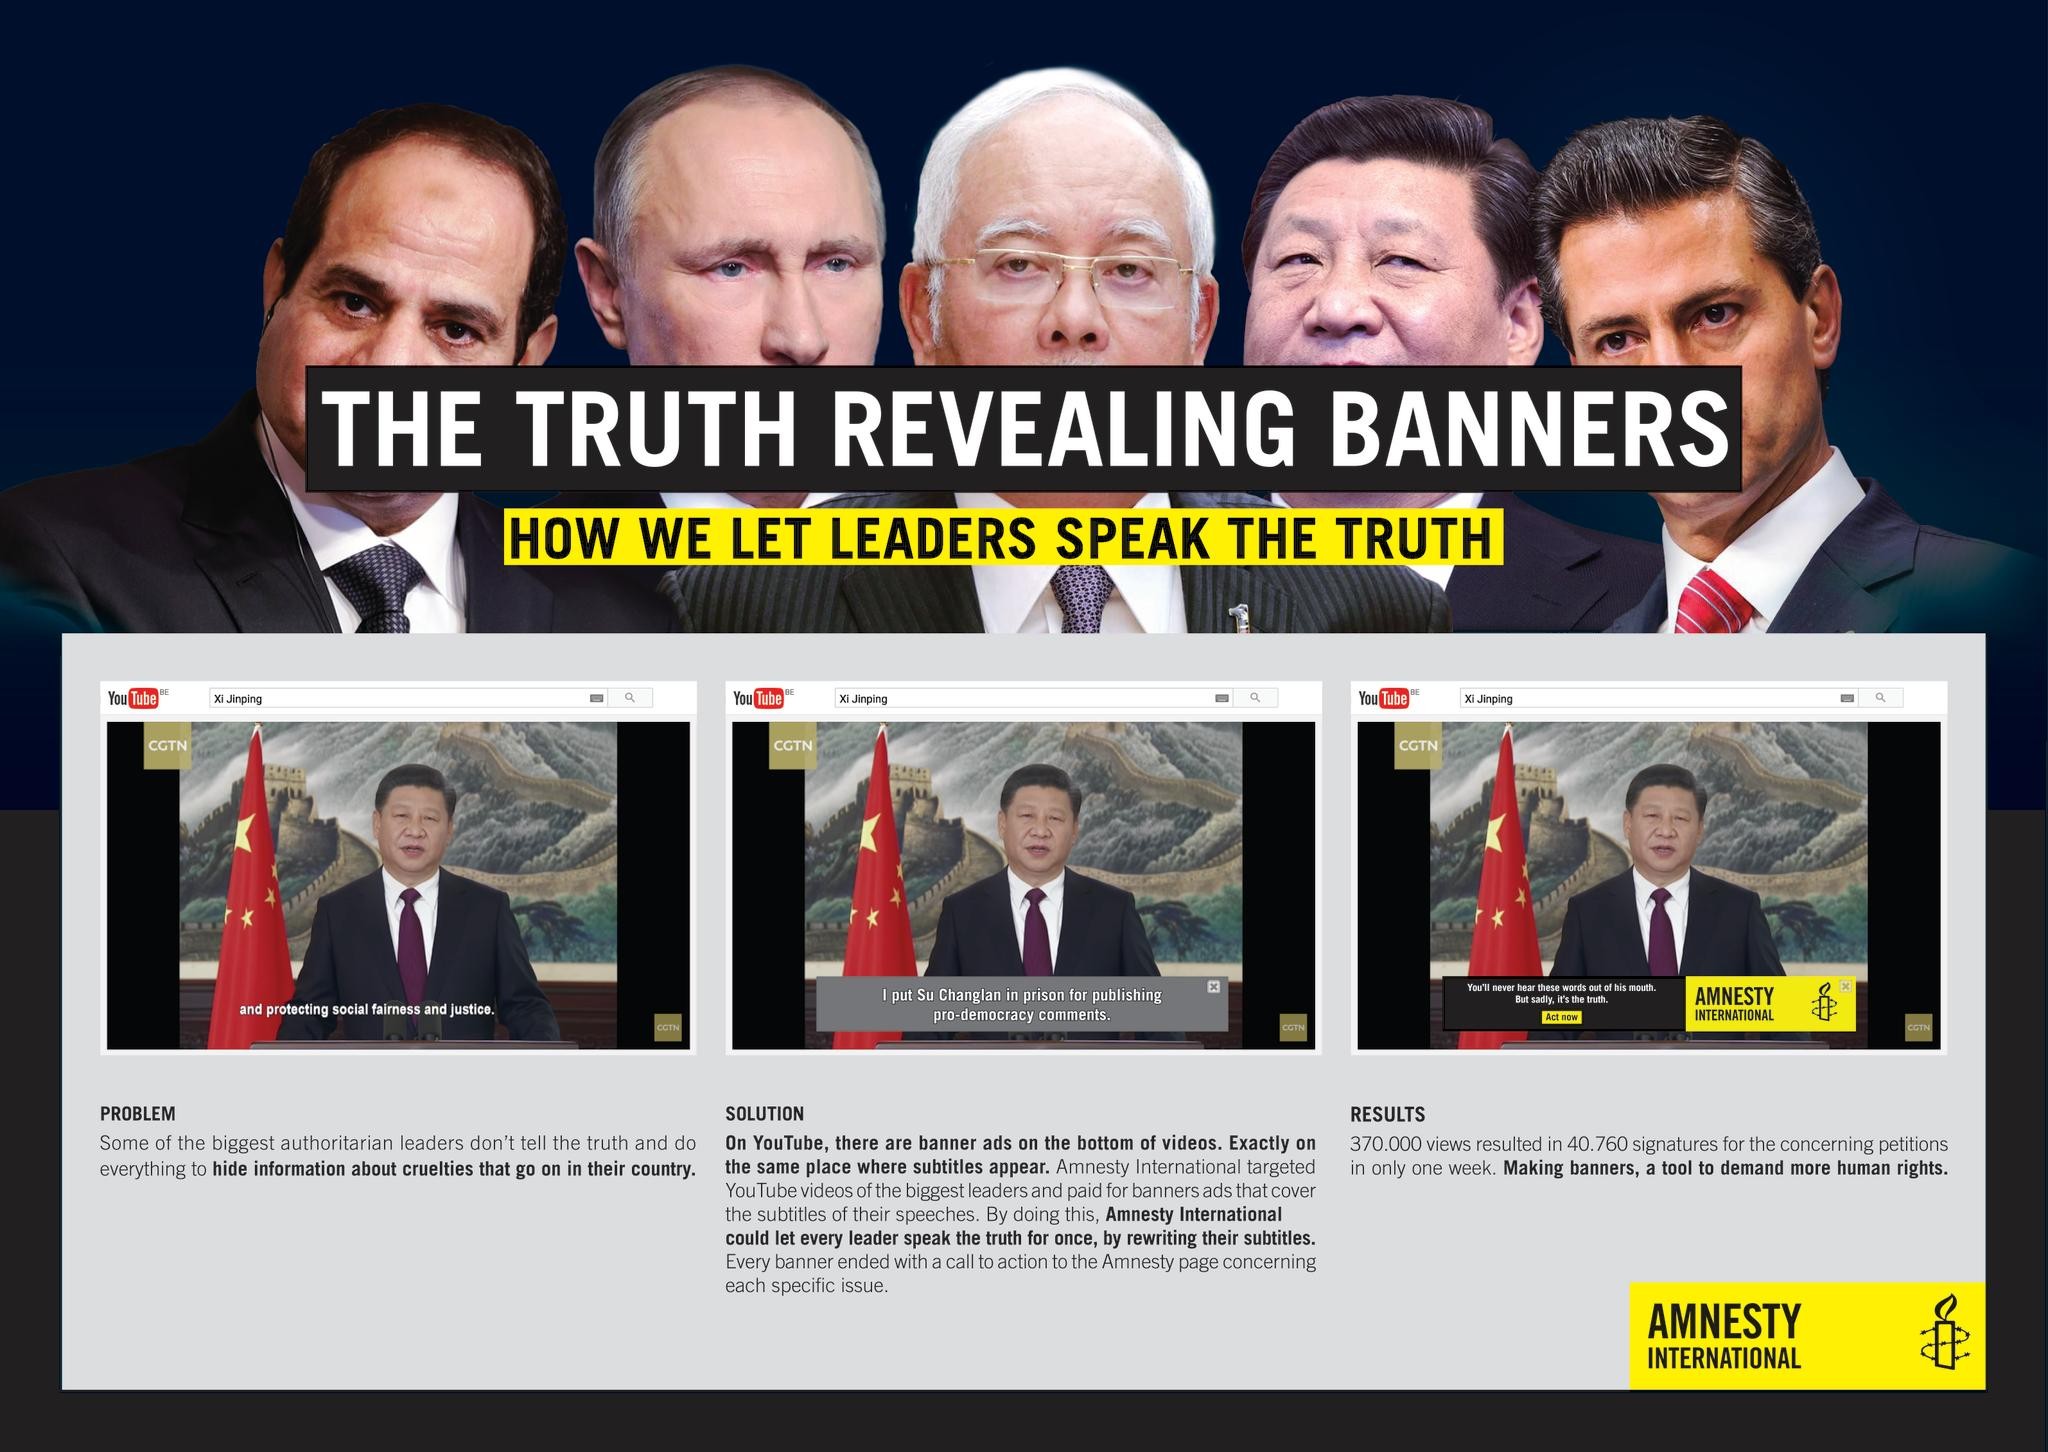 The truth revealing banners